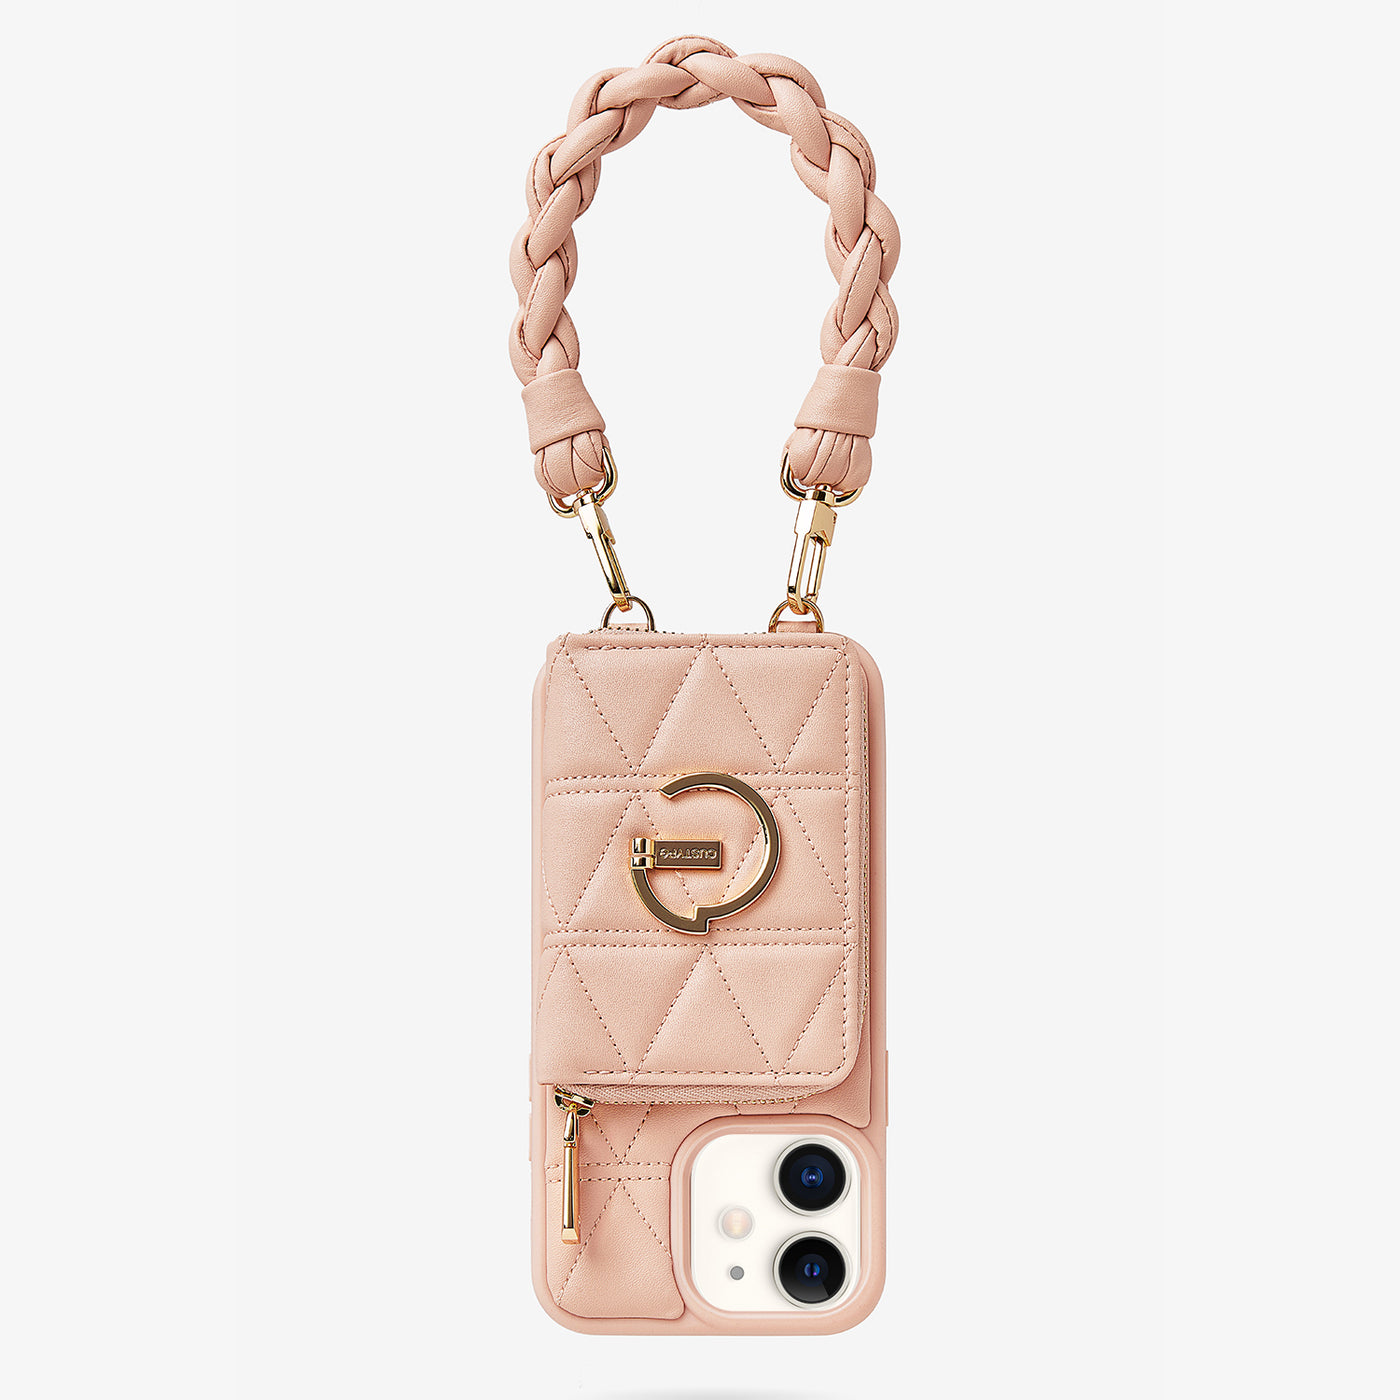 wallet phone case with wristband pink iPhone 11 case cover